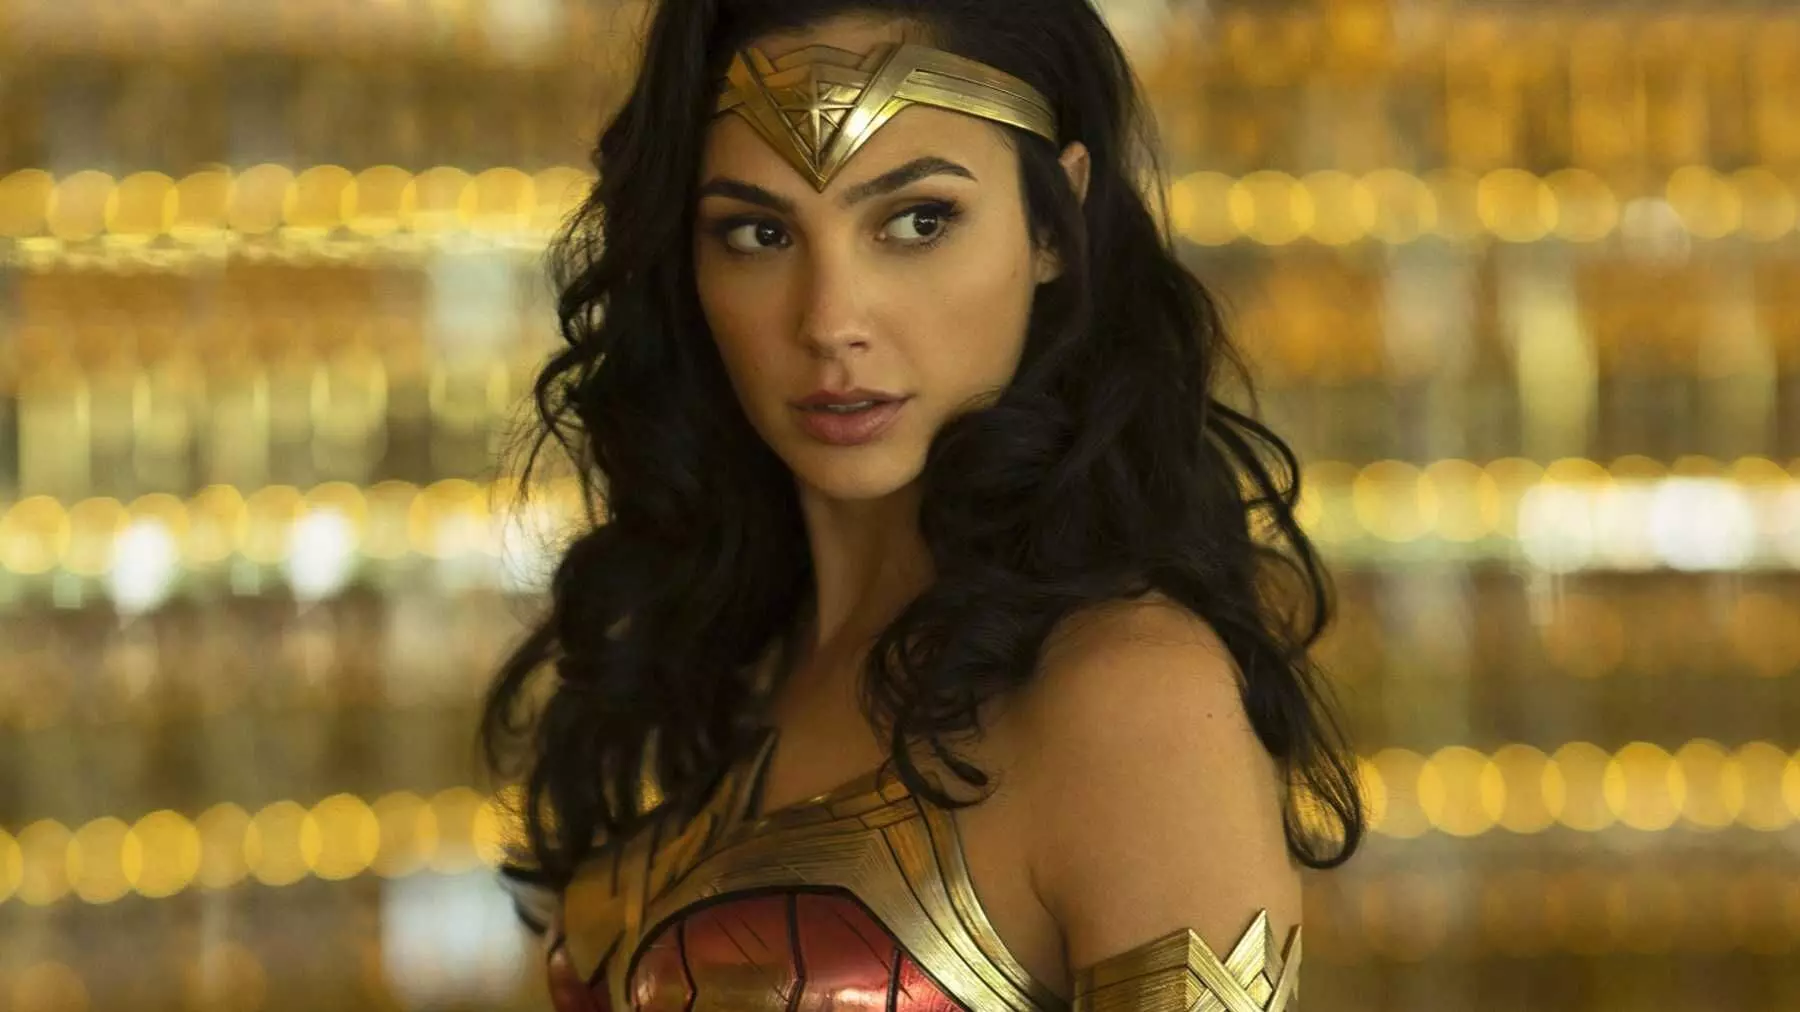 Box Office: ‘Wonder Woman 1984’ Sputters in China, Grosses $38.5 Million Overseas